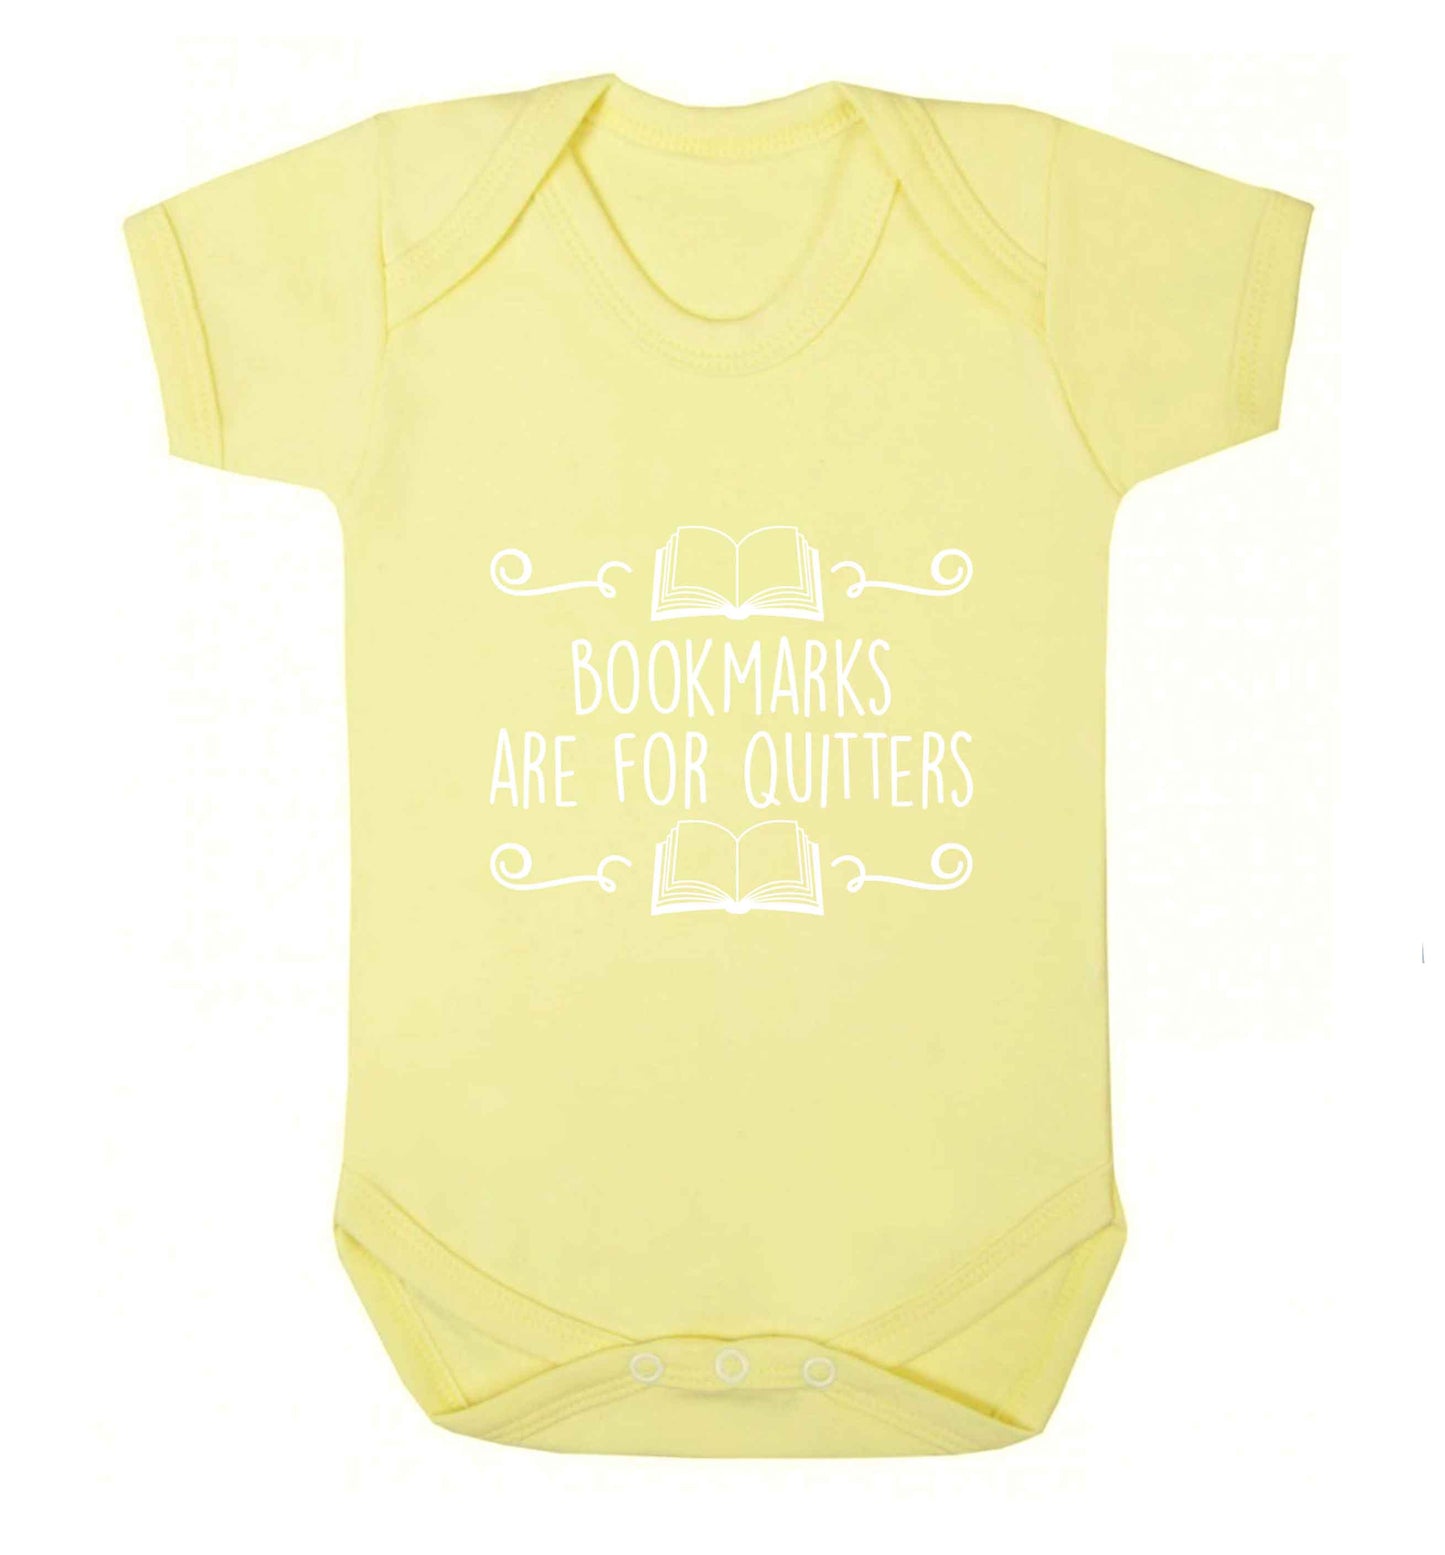 Bookmarks are for quitters baby vest pale yellow 18-24 months